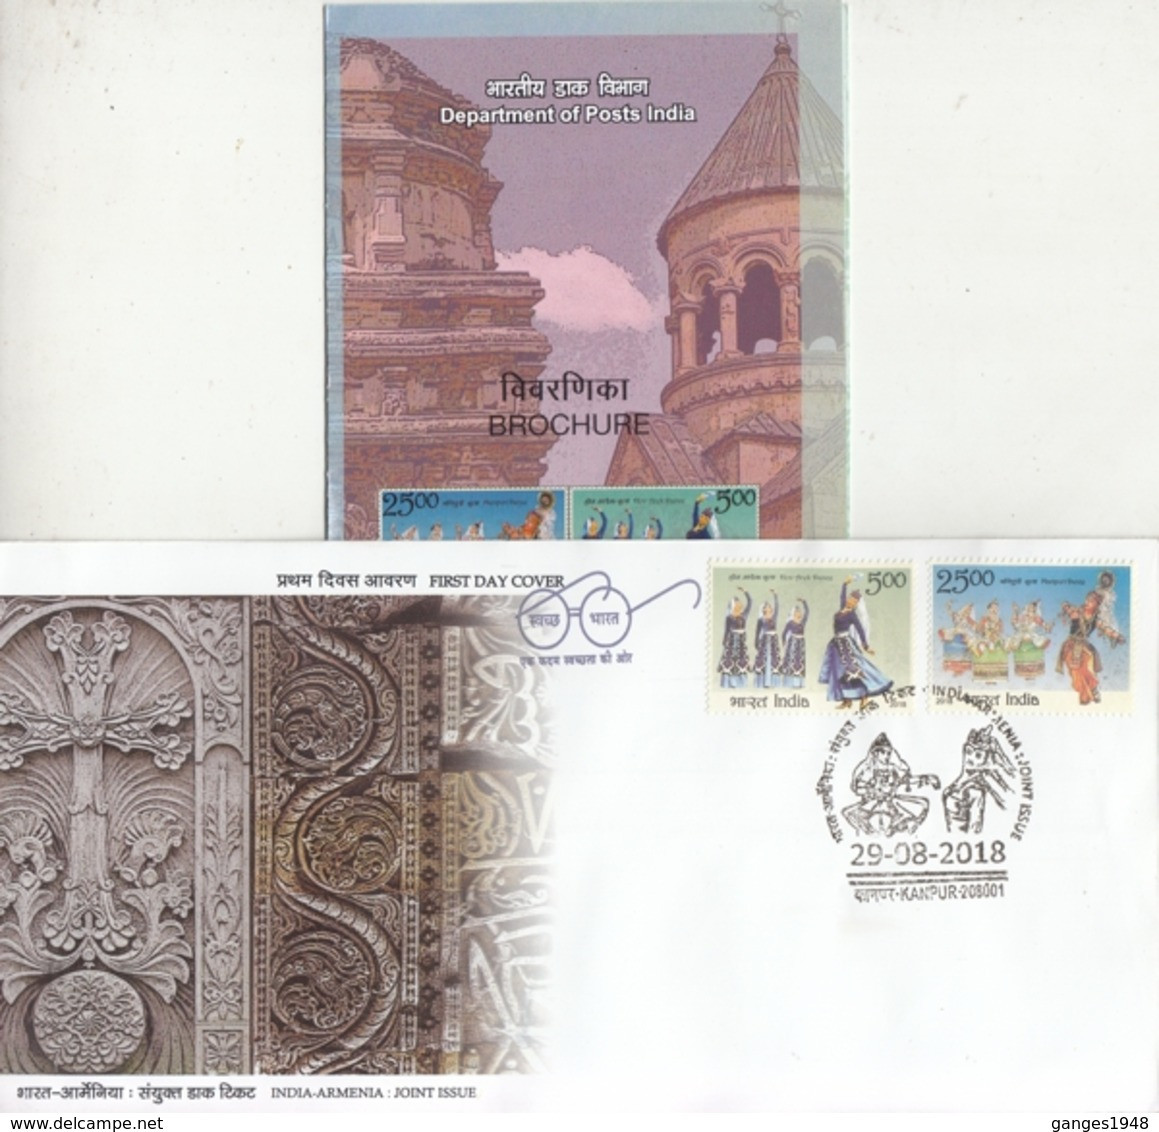 India  2018  India - Armenia  Joint Issue  2v  Kanpur  First Day Cover + Plain Brochure  # 15605  Inde  Indien - FDC